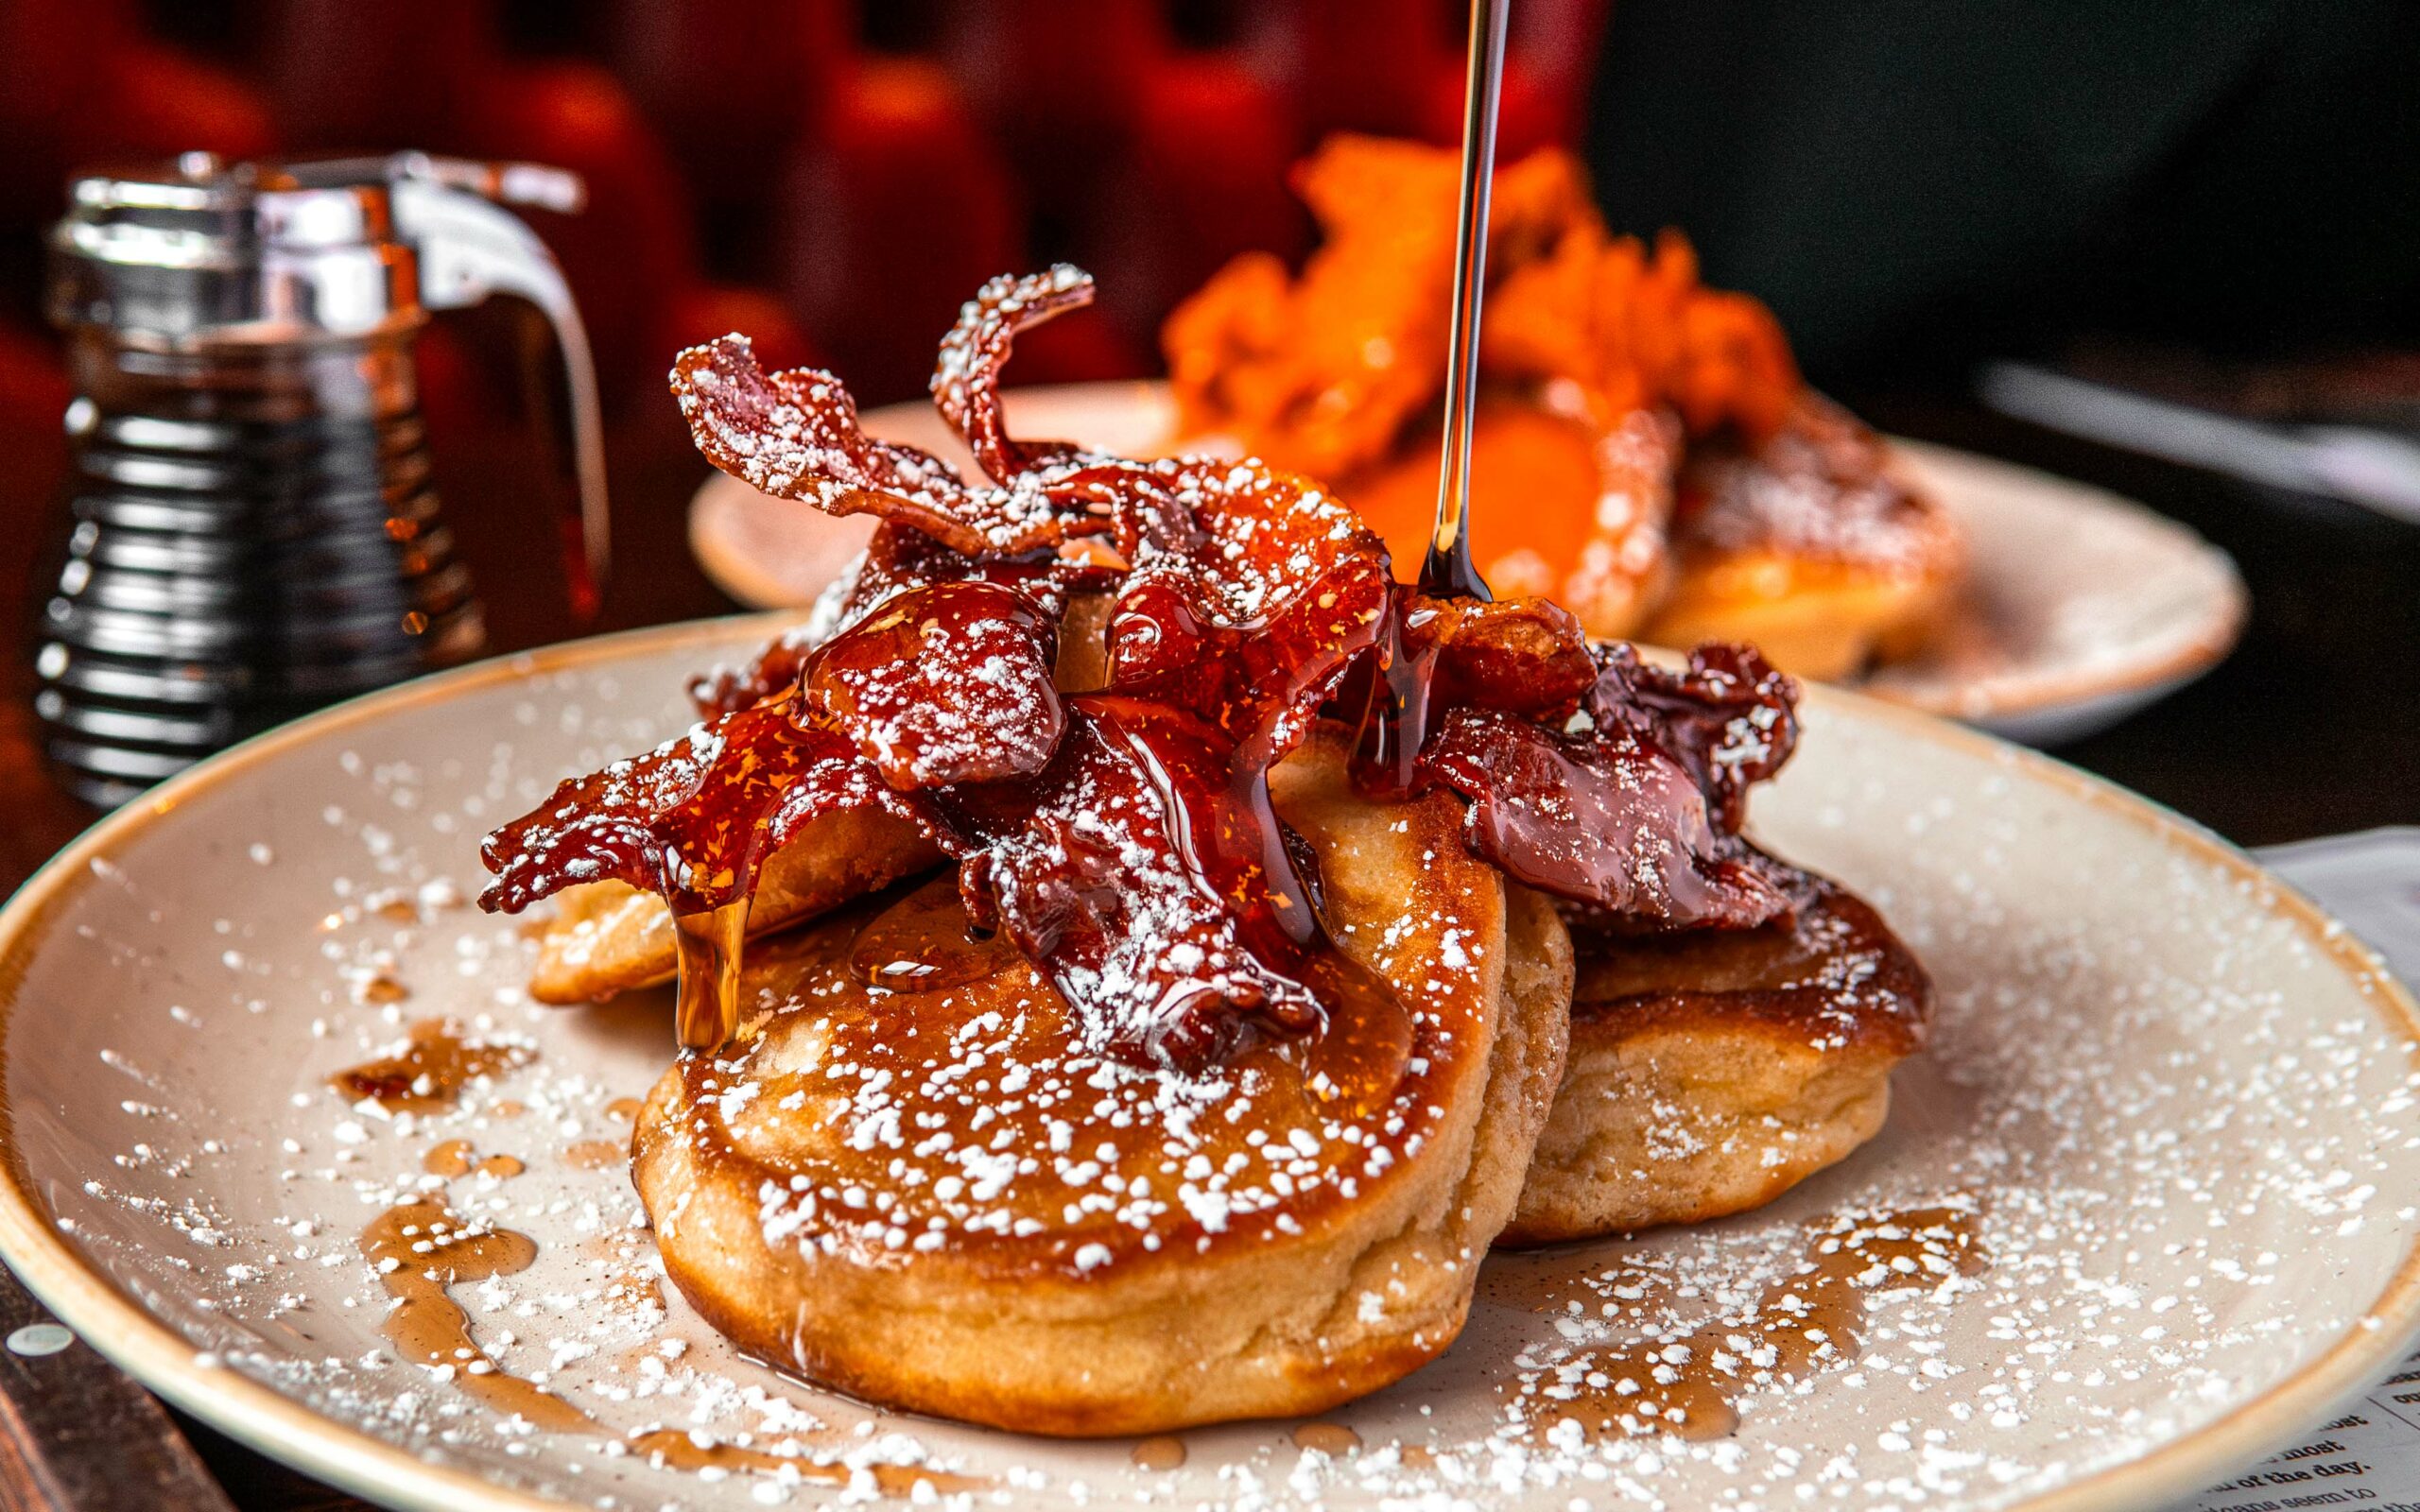 Bacon and maple pancakes at character brunch